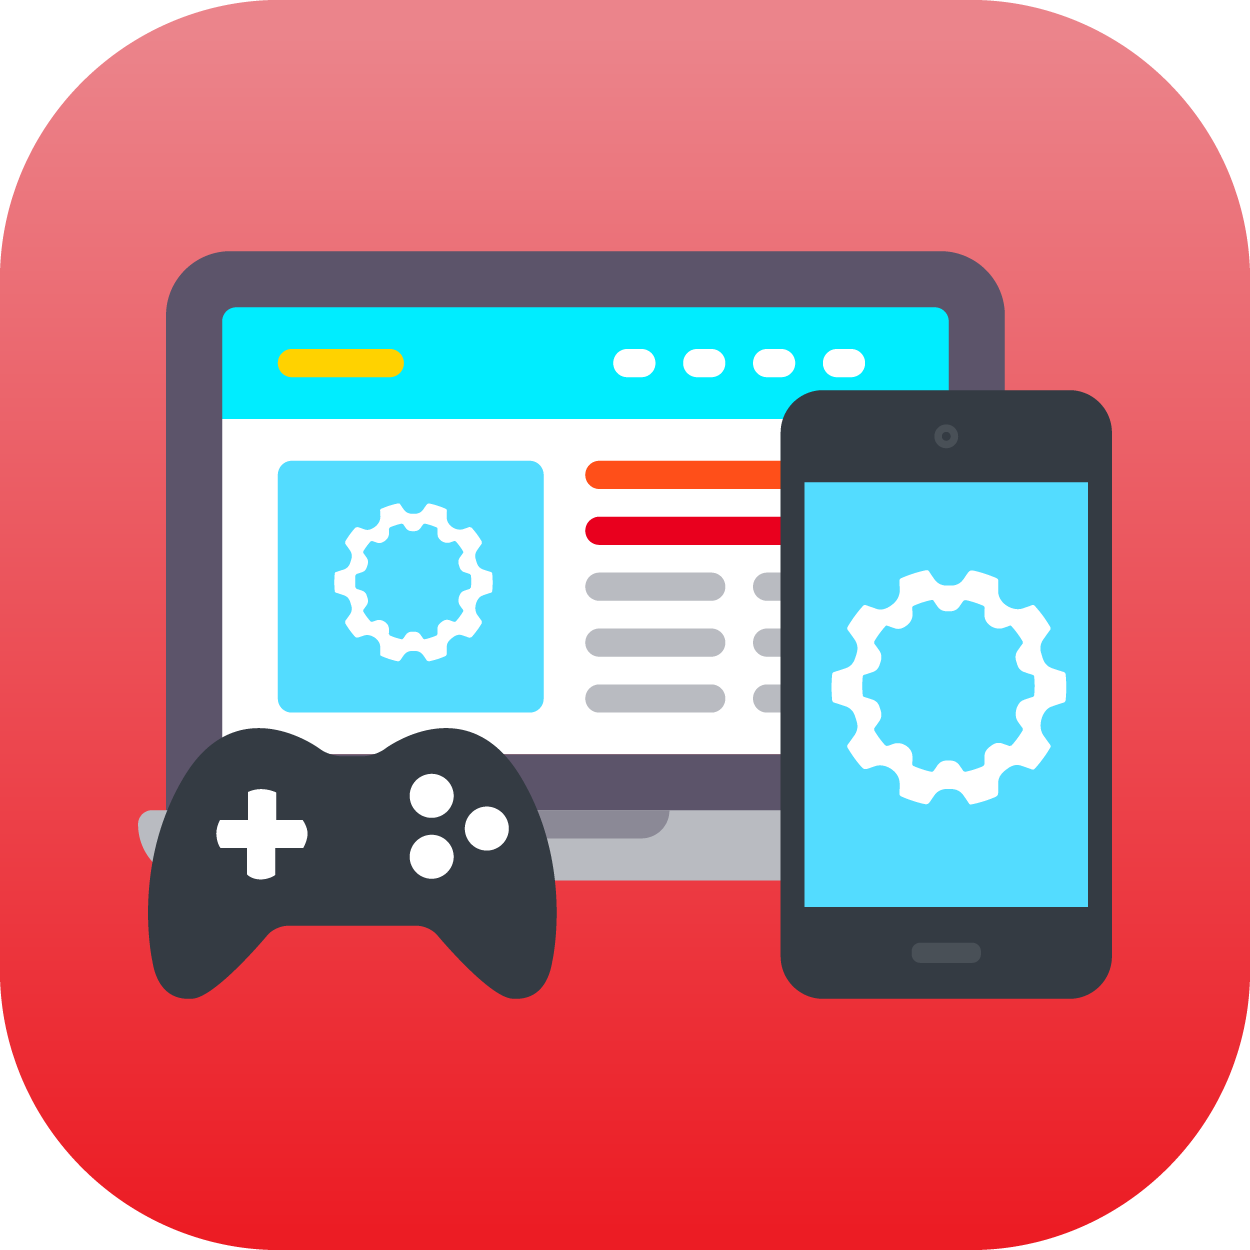 Web, Mobile, and Game Development